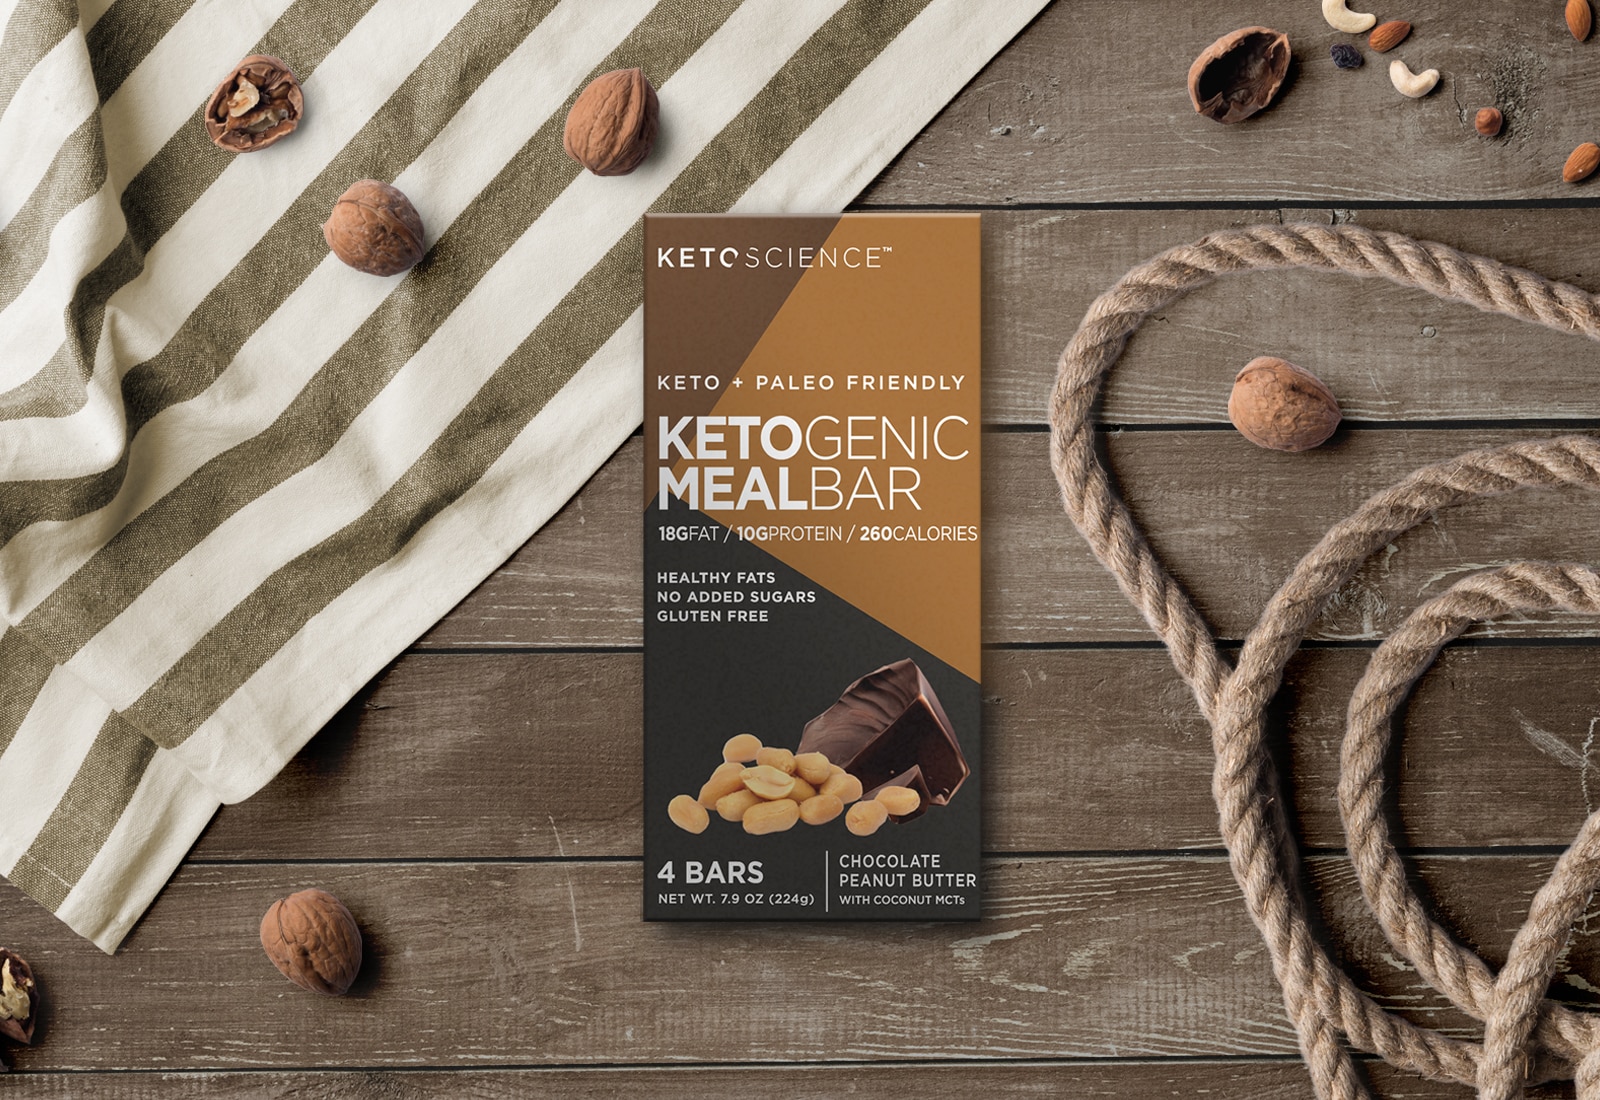 The final design for a box of ketogenic meal bars with black and shades of brown contrasting geometric shapes